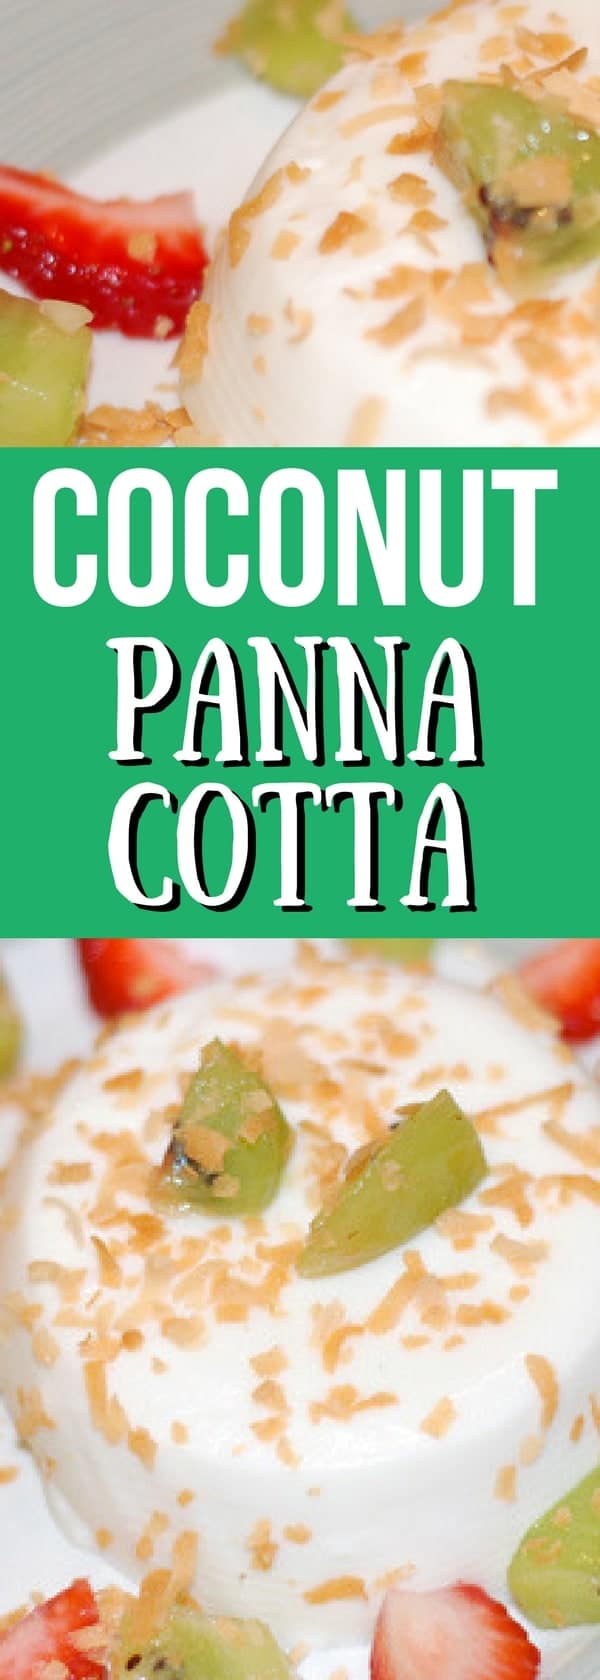 Delicious and easy coconut panna cotta recipe with only 6 ingredients. #pannacotta #dessert #coconut